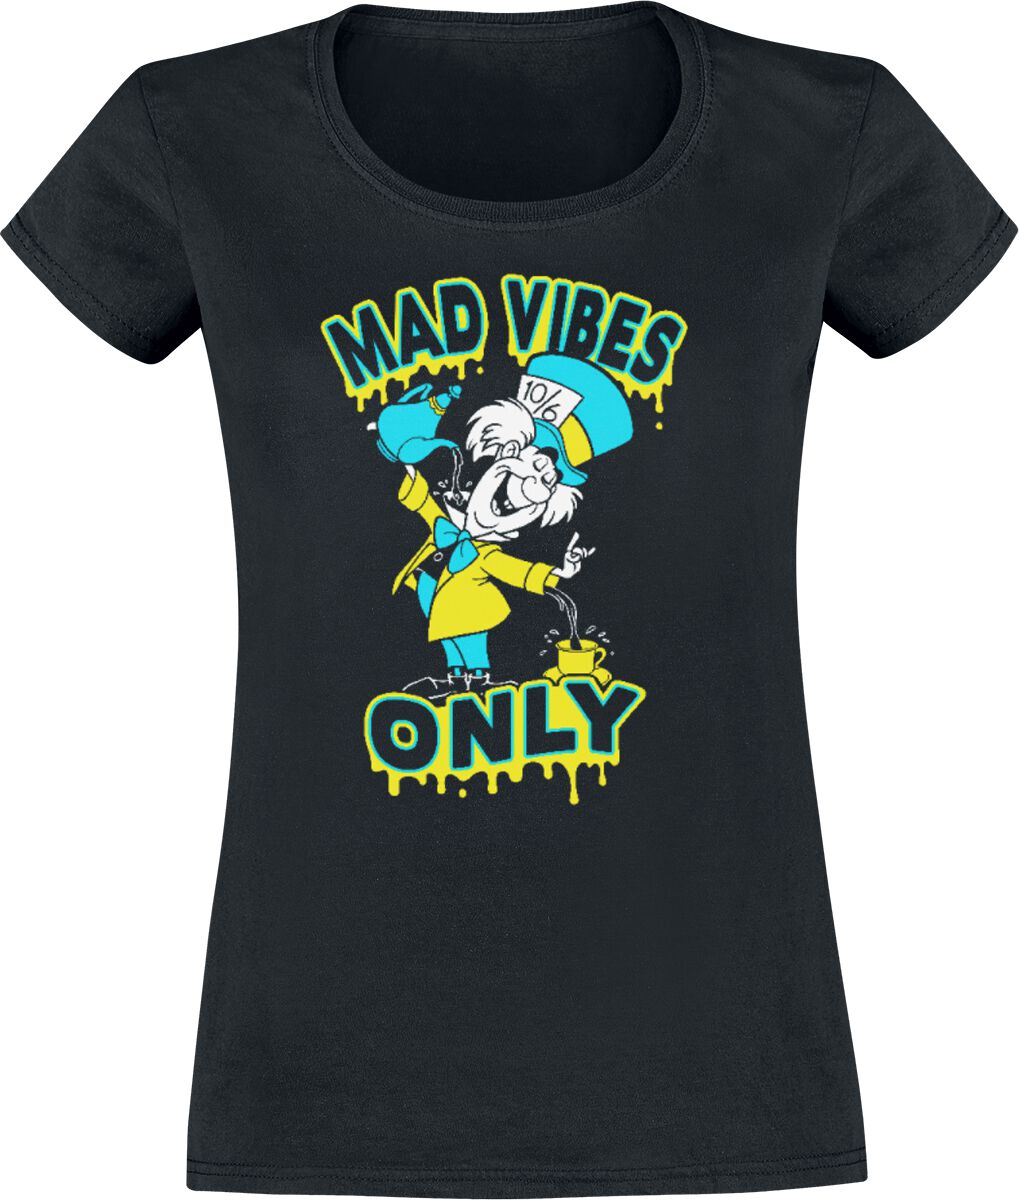 Alice in Wonderland Mad Vibes Only T-Shirt black